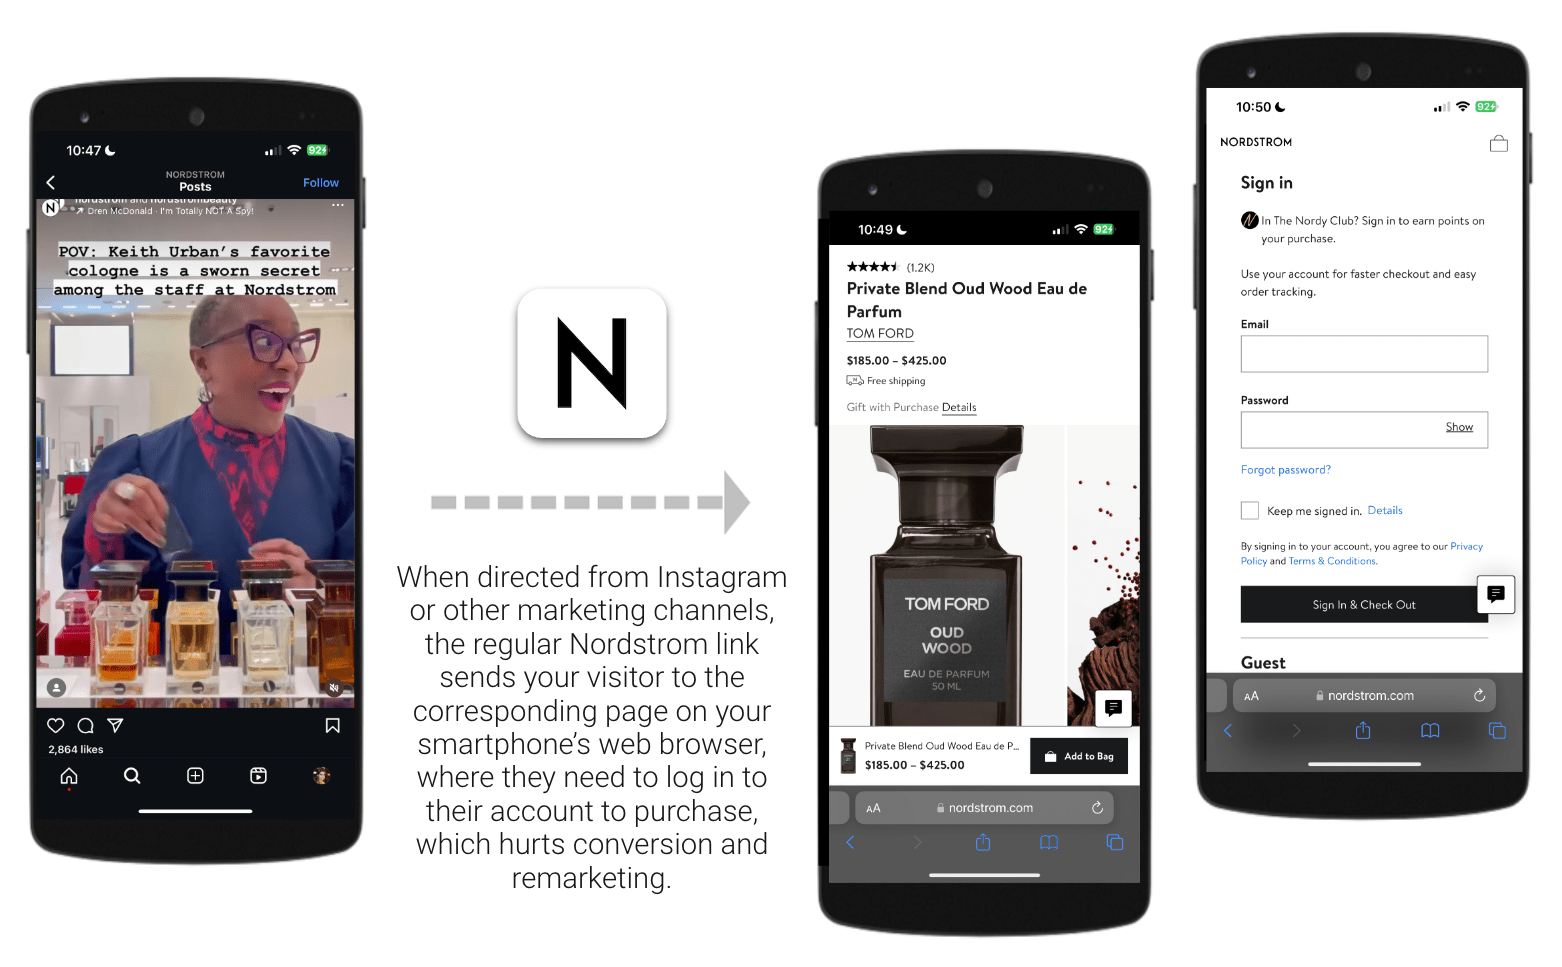 How Affiliates and Influencers Can Generate Instagram Mobile App URLs to Open the Nordstrom App